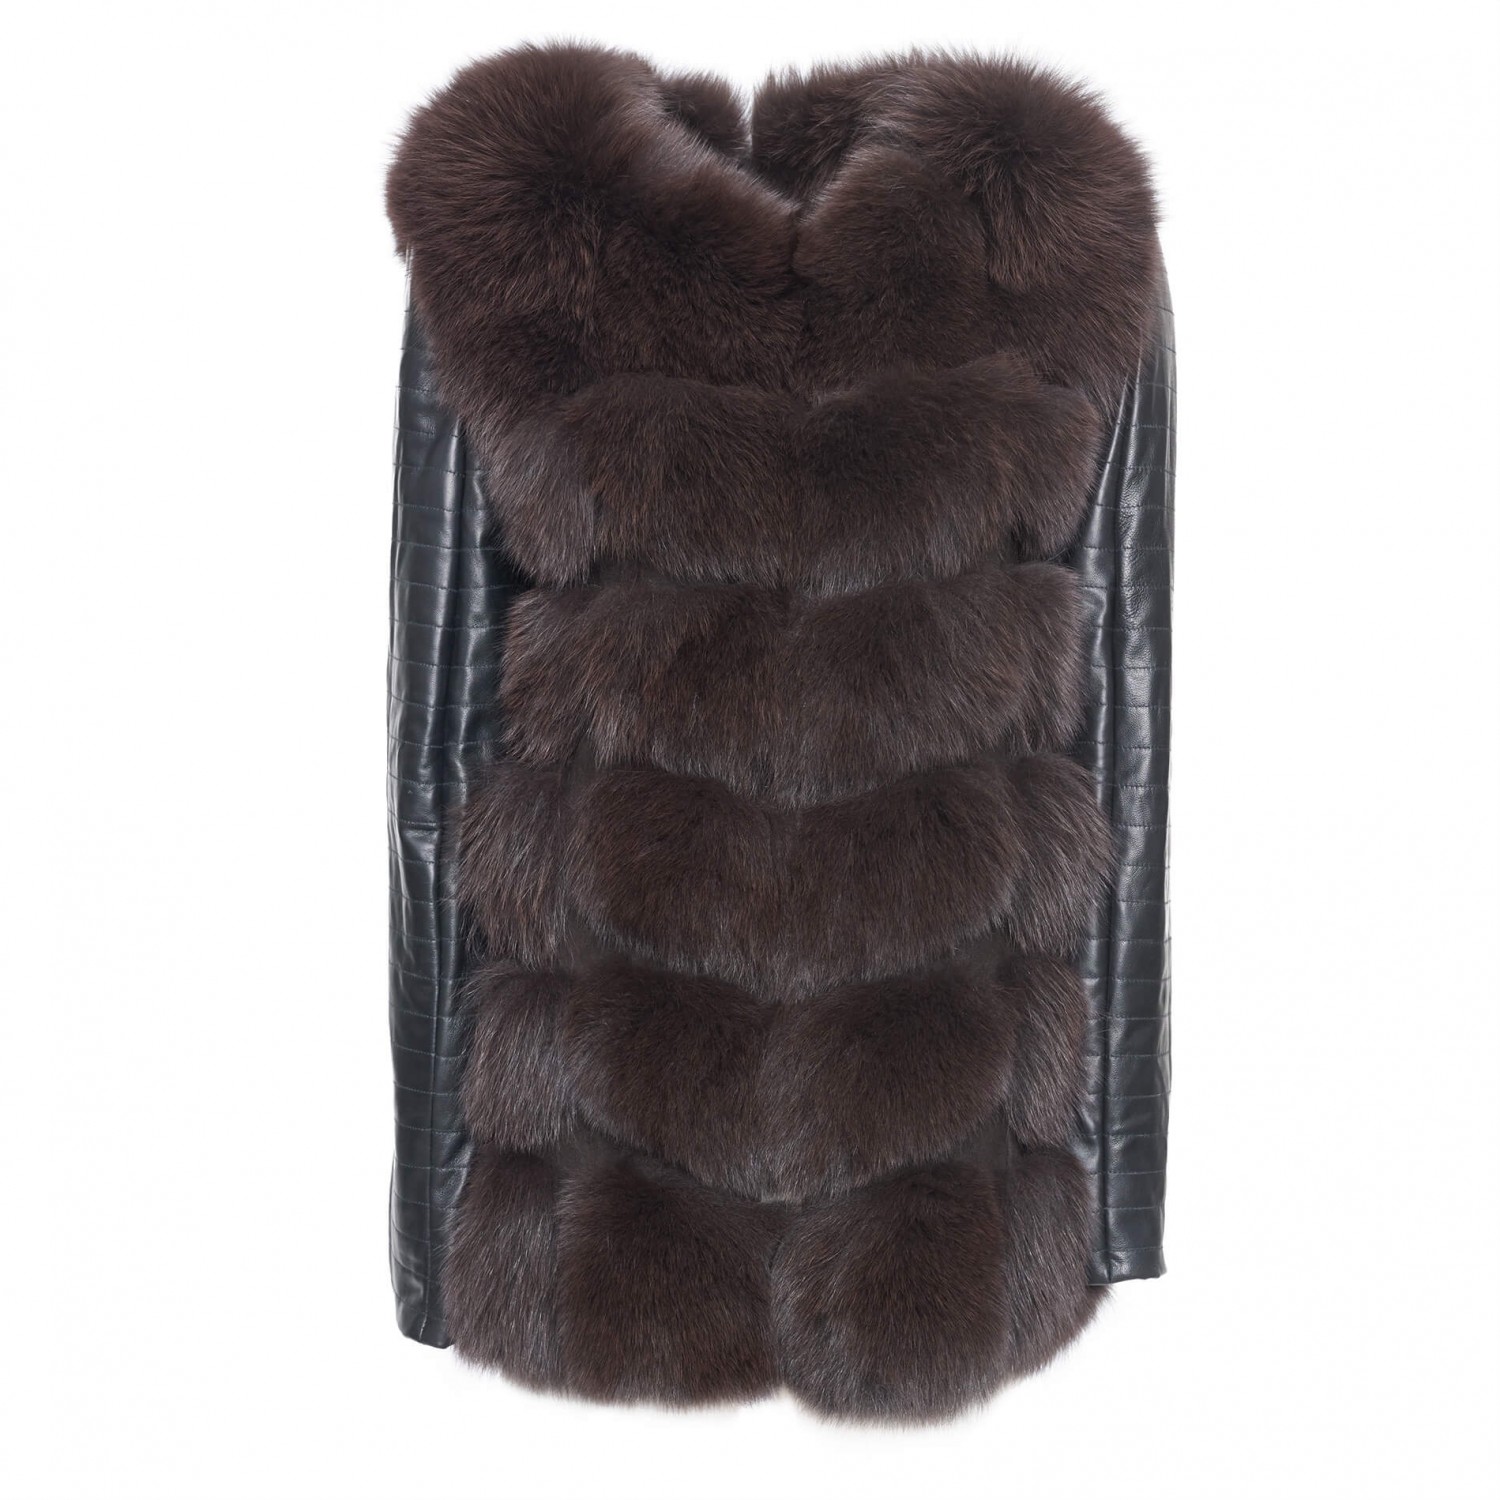 Real fur jacket with leather sleeves